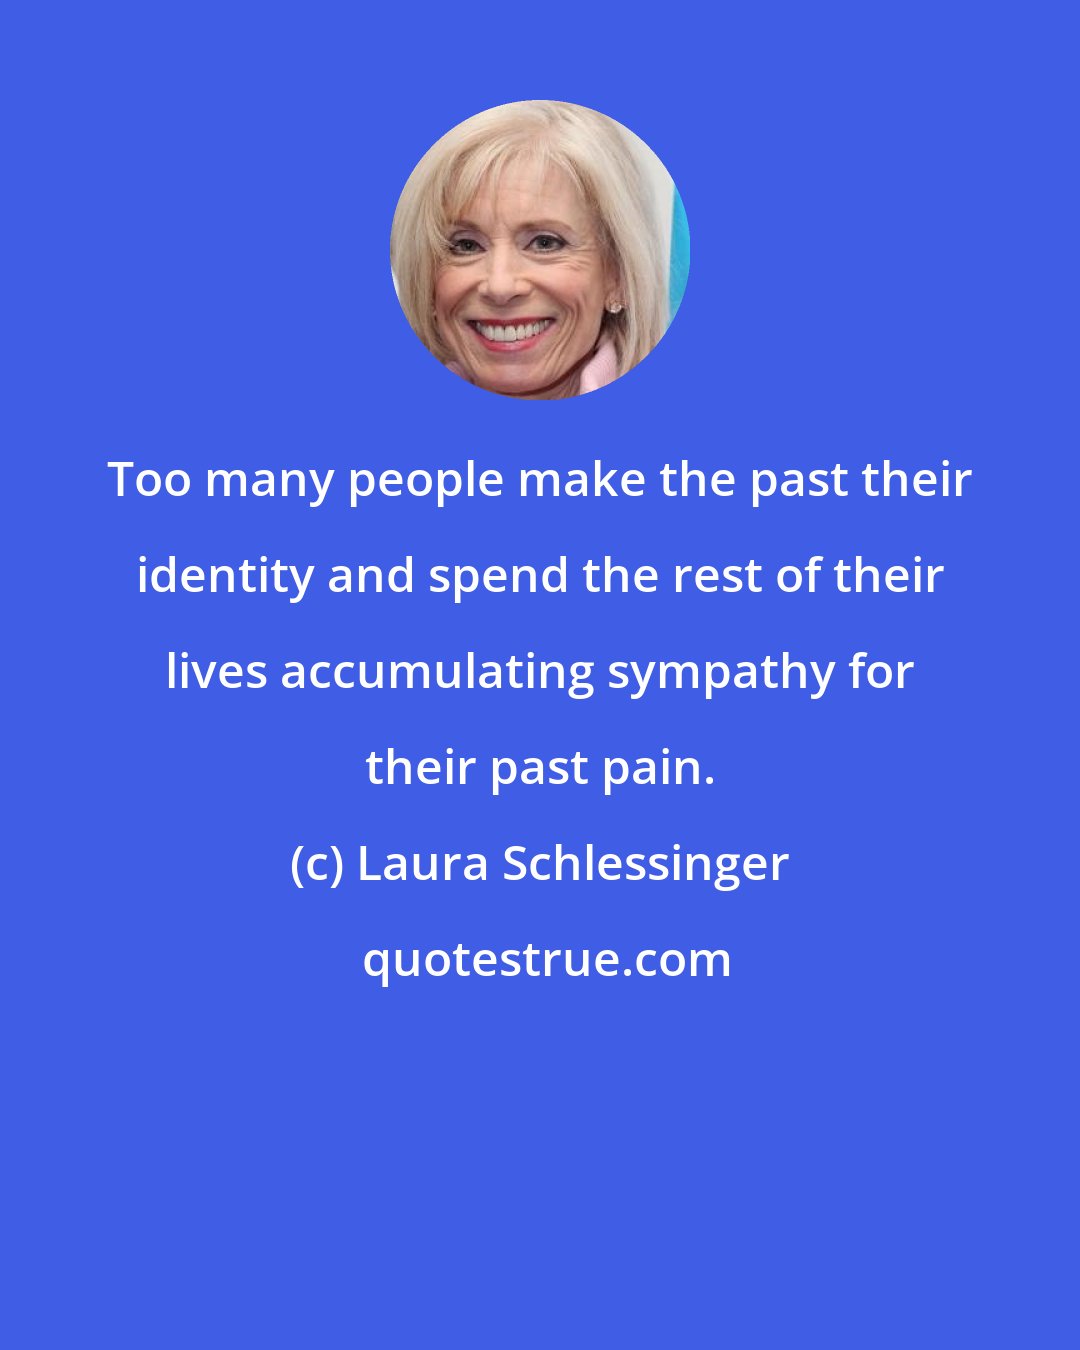 Laura Schlessinger: Too many people make the past their identity and spend the rest of their lives accumulating sympathy for their past pain.